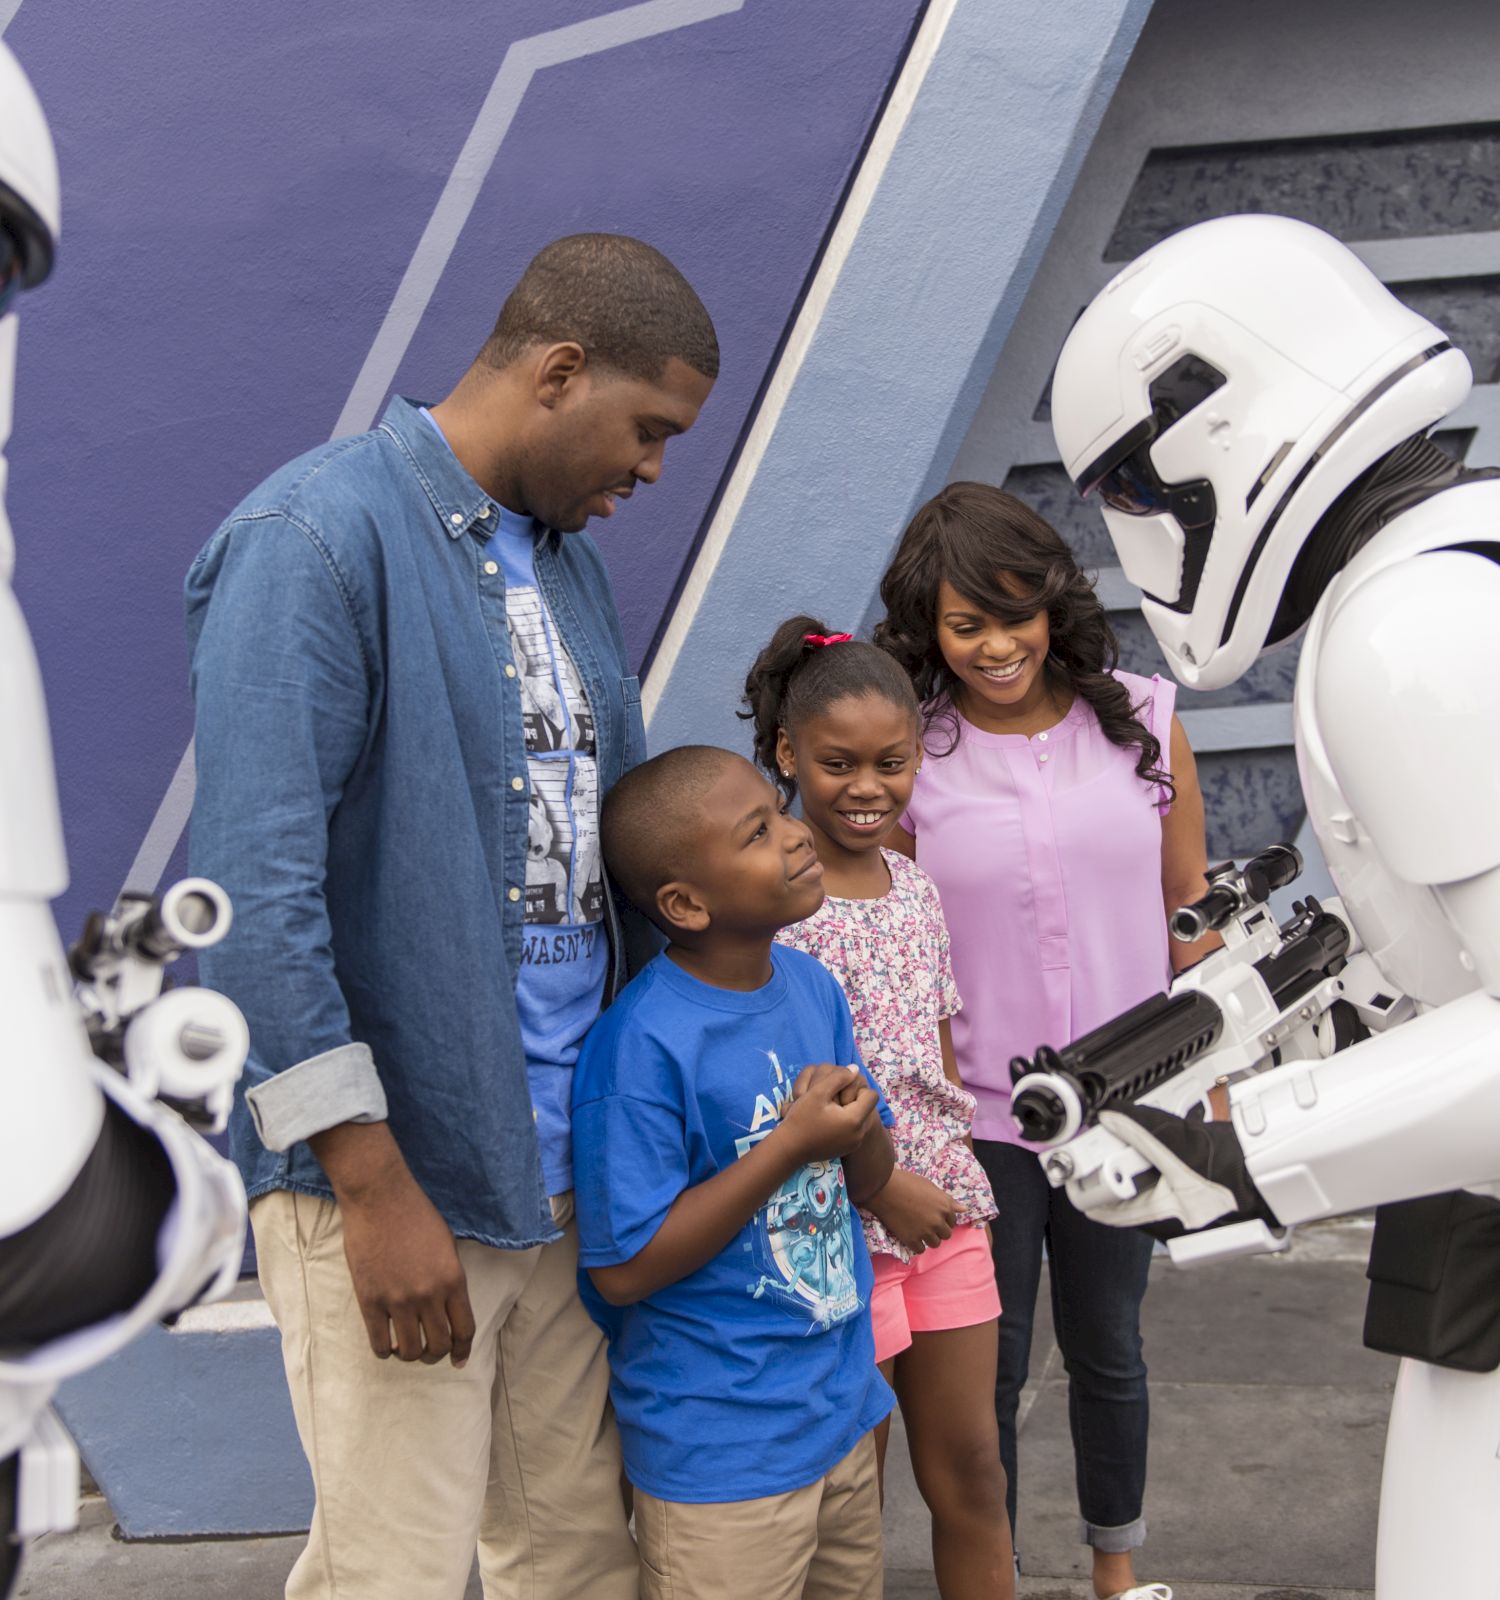 A family interacts with two people dressed as stormtroopers from Star Wars, smiling brightly in an amusement park setting.